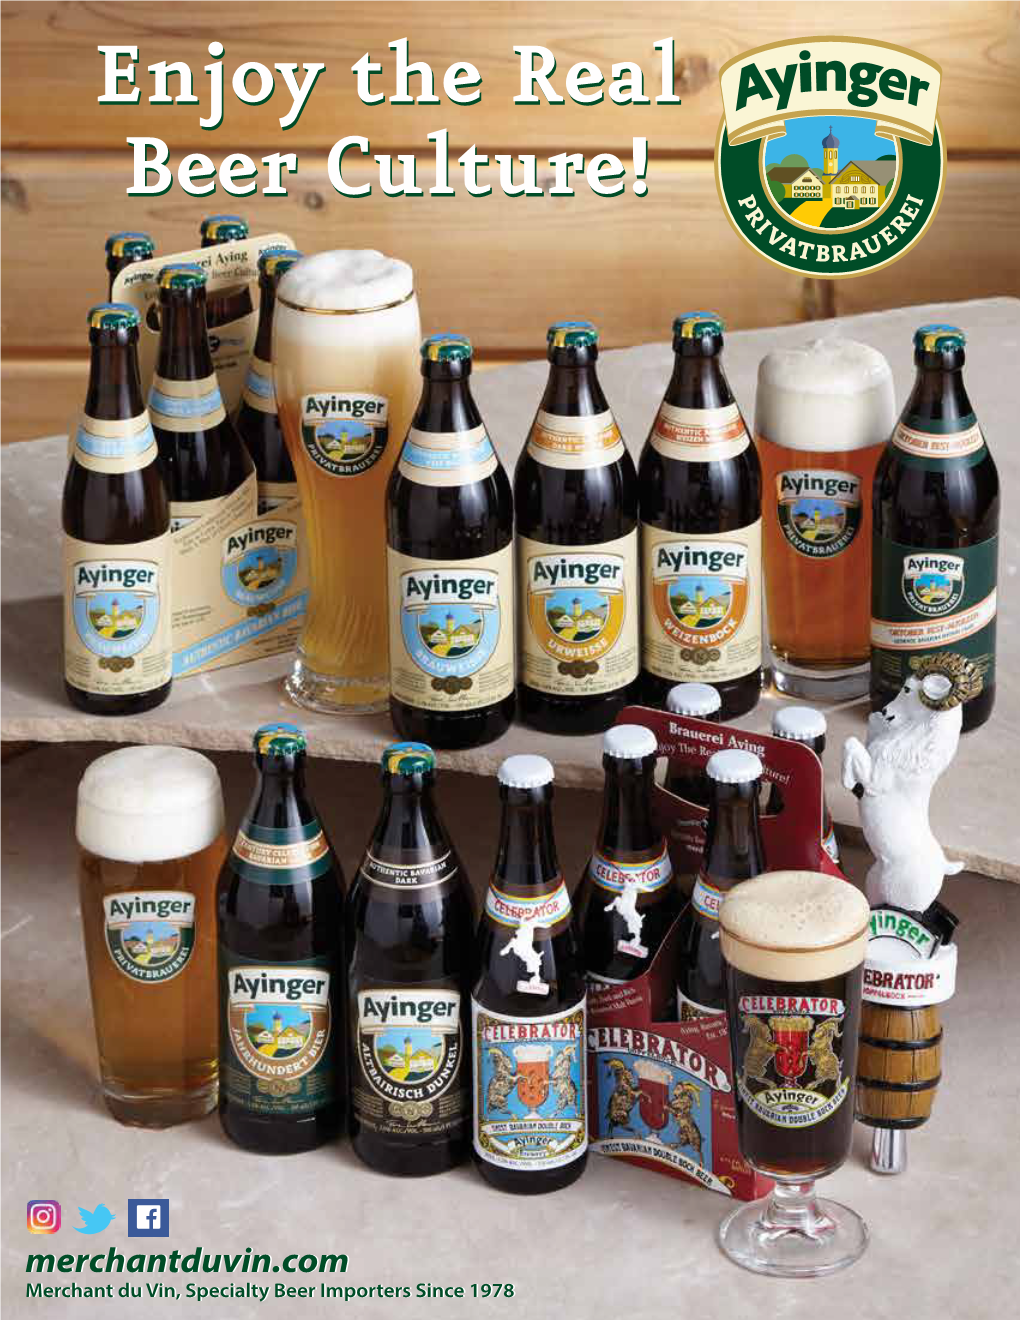 Enjoy the Real Beer Culture!